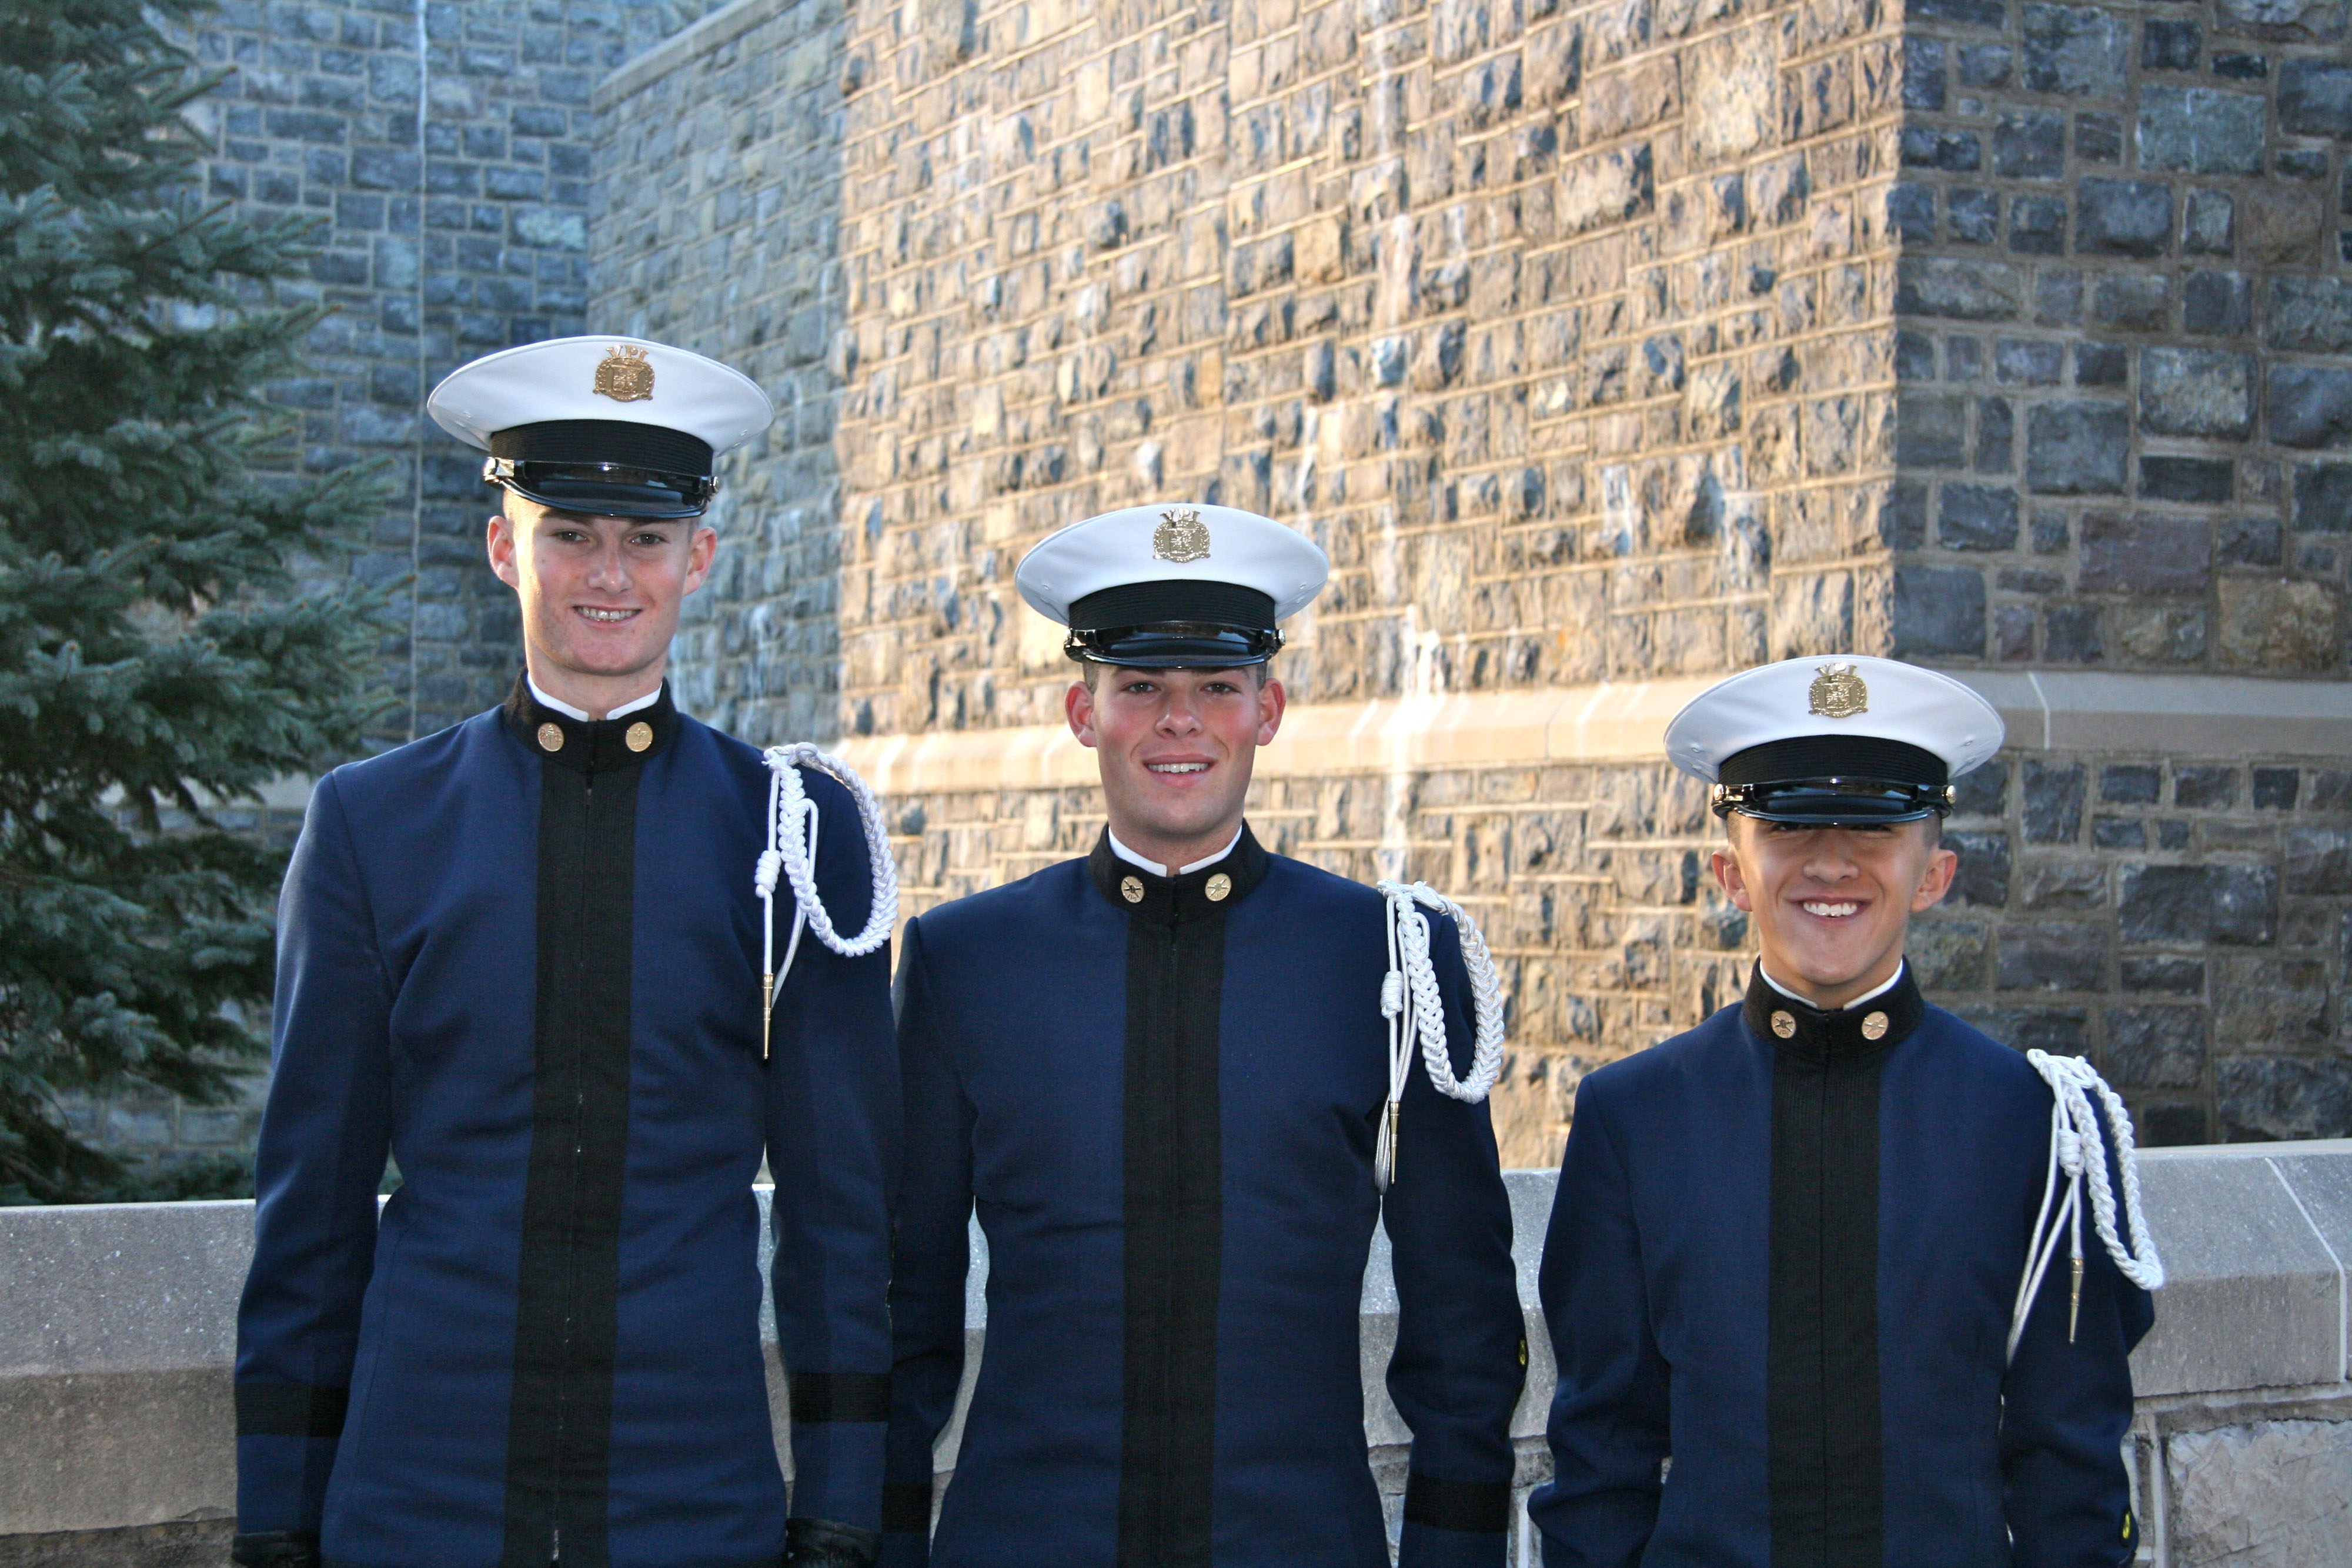 From left to right are Cadets Keith Himmelberger, Alexander Zuchowicz, and Matthew Gurski